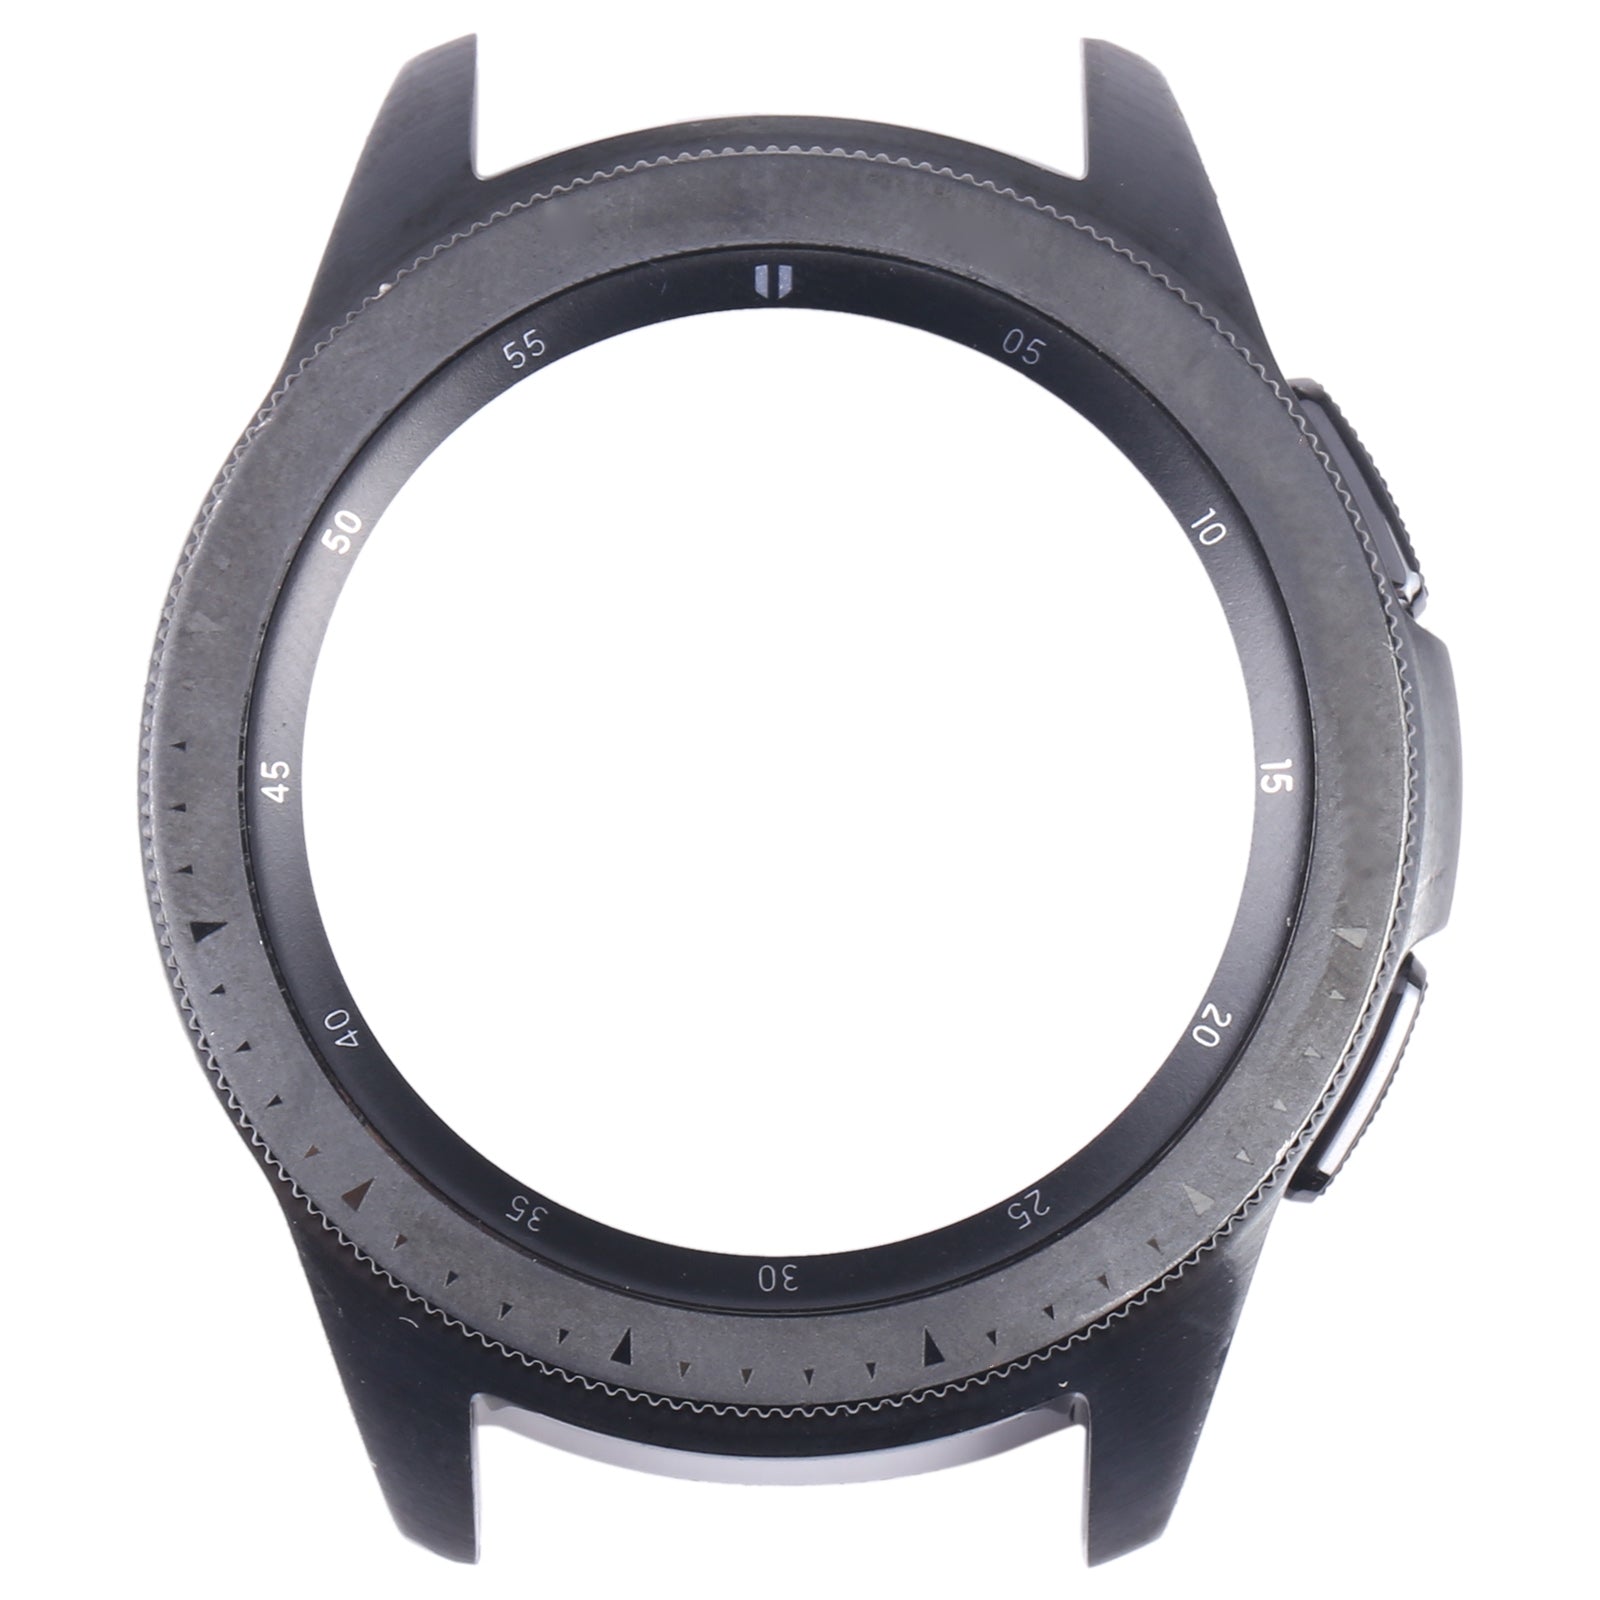 Chassis Front Frame Screen Samsung Galaxy Watch 42mm R810 Black